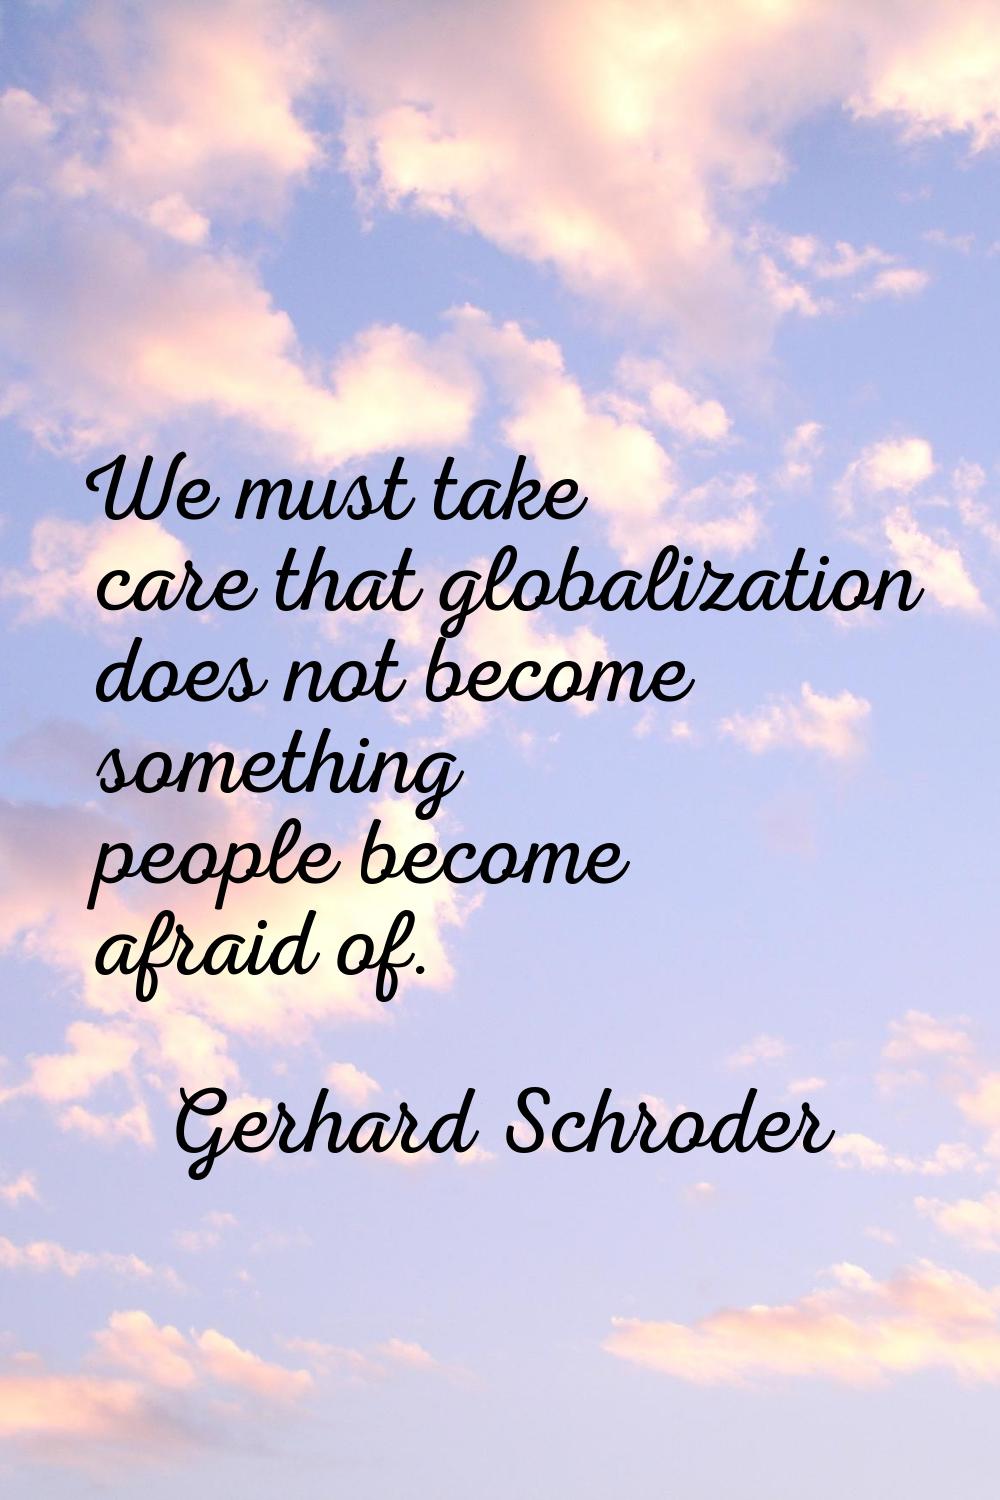 We must take care that globalization does not become something people become afraid of.